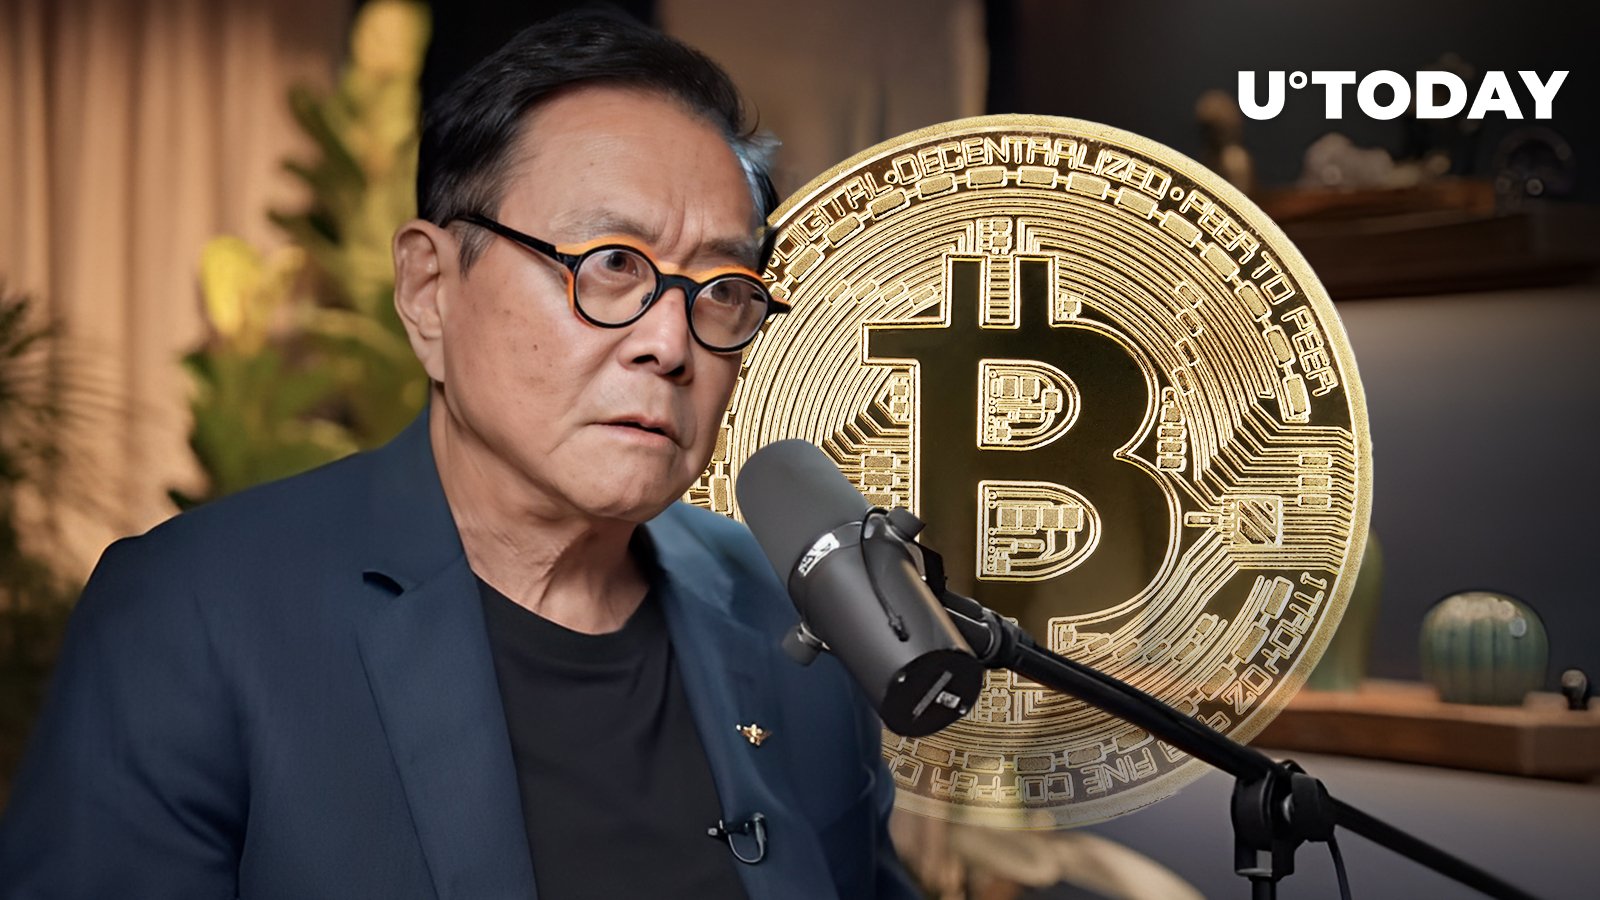 "Rich Dad, Poor Dad" Author Issues Major Bitcoin Warning